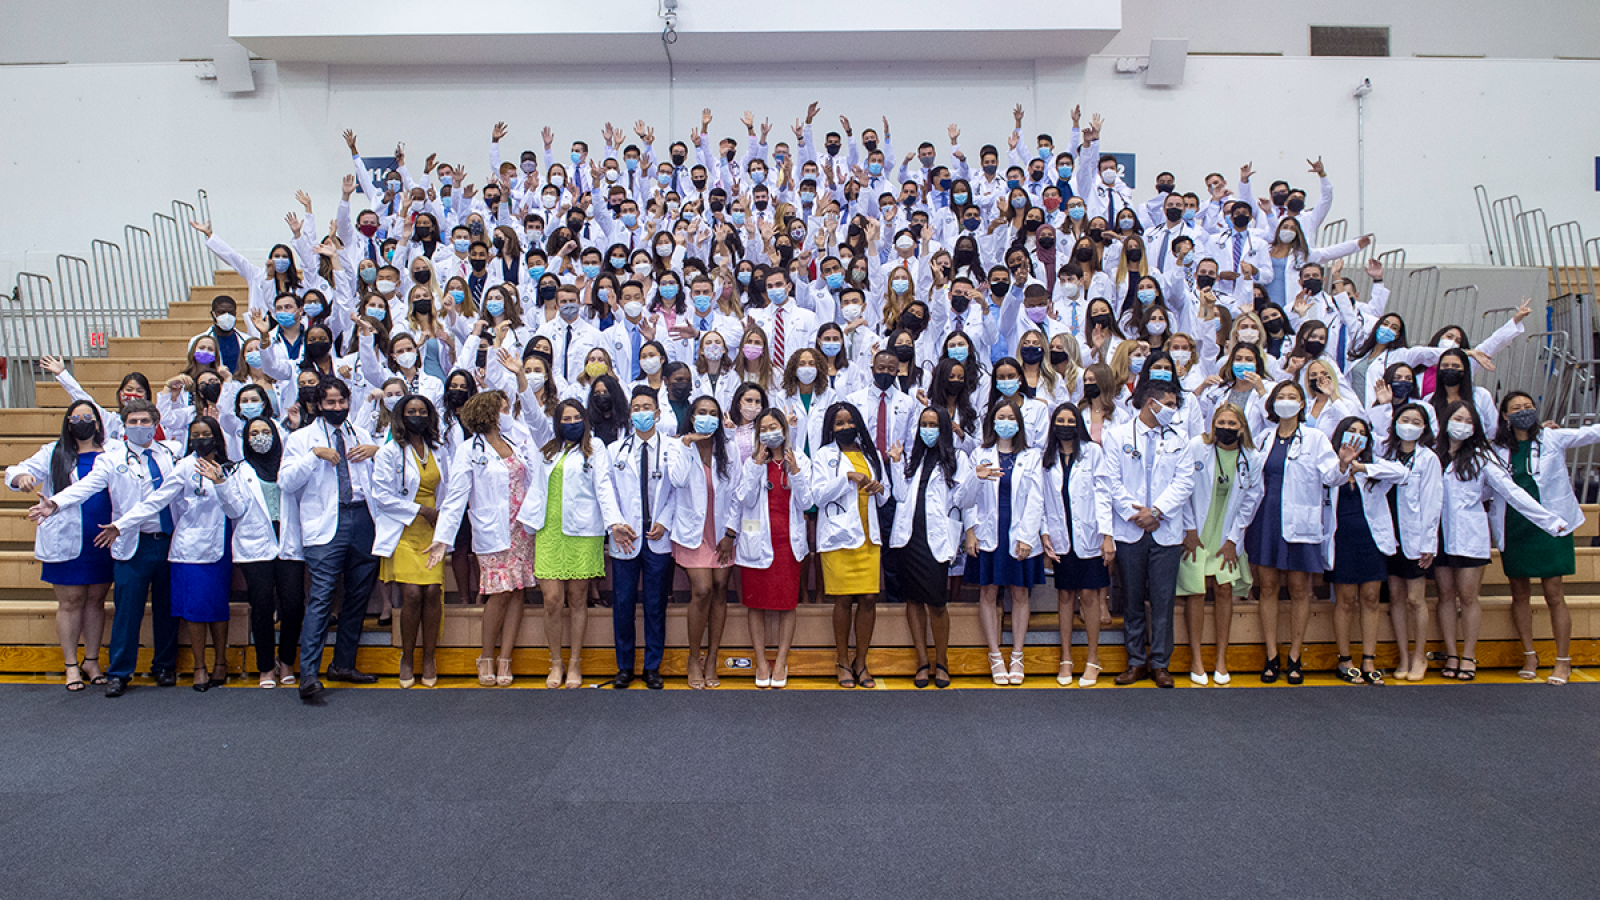 Medical students wear white coats pose for a photo on bleachers